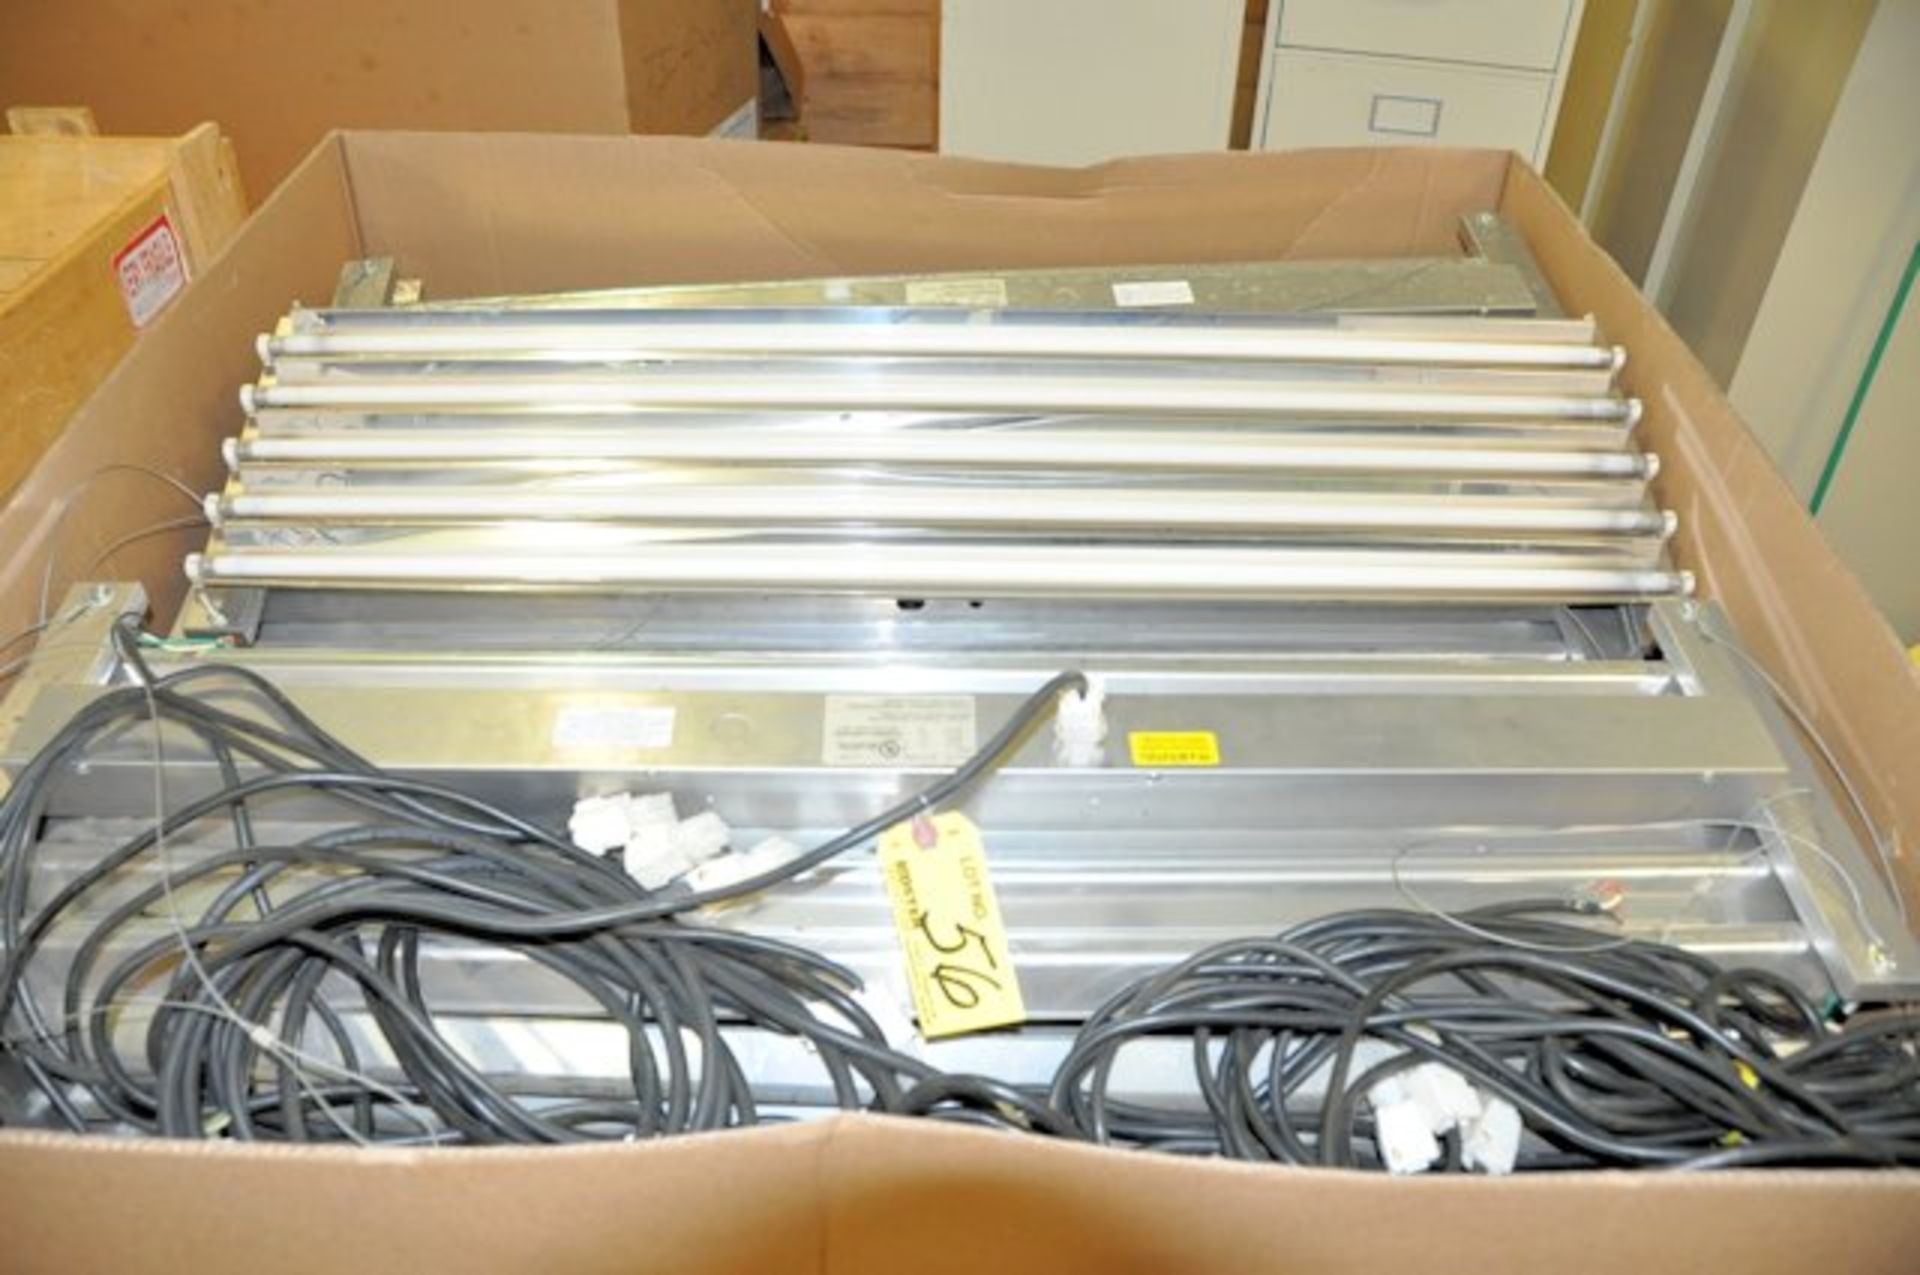 LOT OF T5 HIGH BAY FLUORESCENT LIGHT FIXTURES ON [1] PALLET - Image 2 of 2